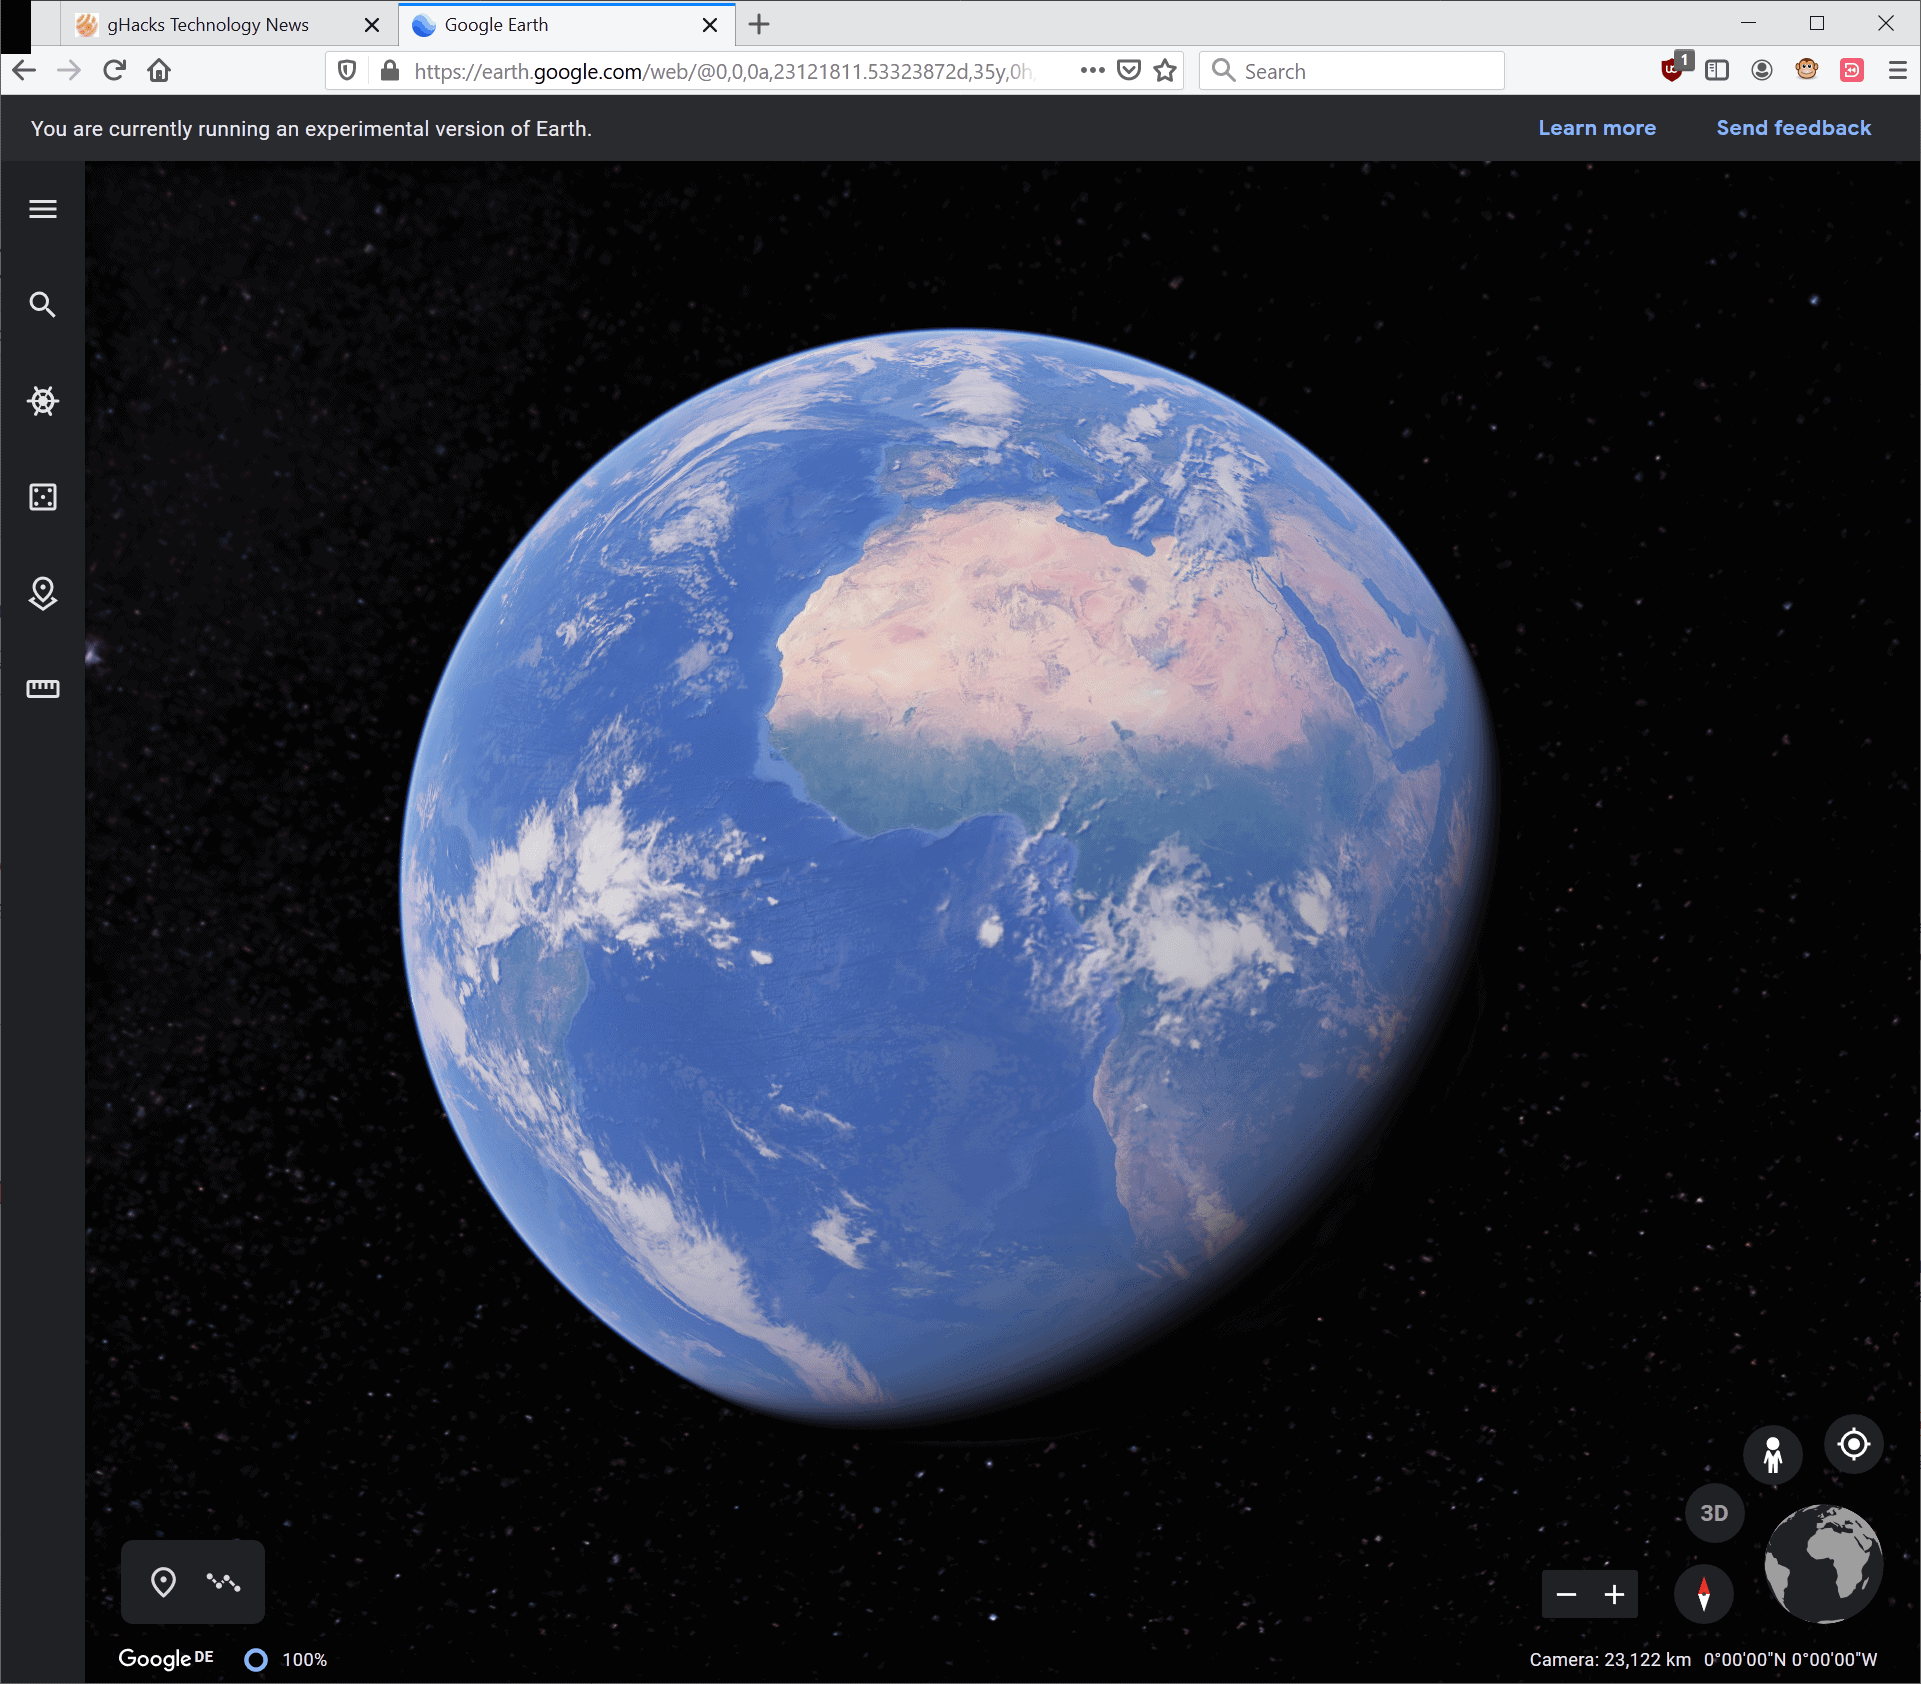 Techmeme Google Officially Adds Support For Google Earth On Firefox Edge And Opera Browsers And Says It Is Working On Adding Support For Safari Martin Brinkmann Ghacks Technology News - yhttps://www.roblox.com/home